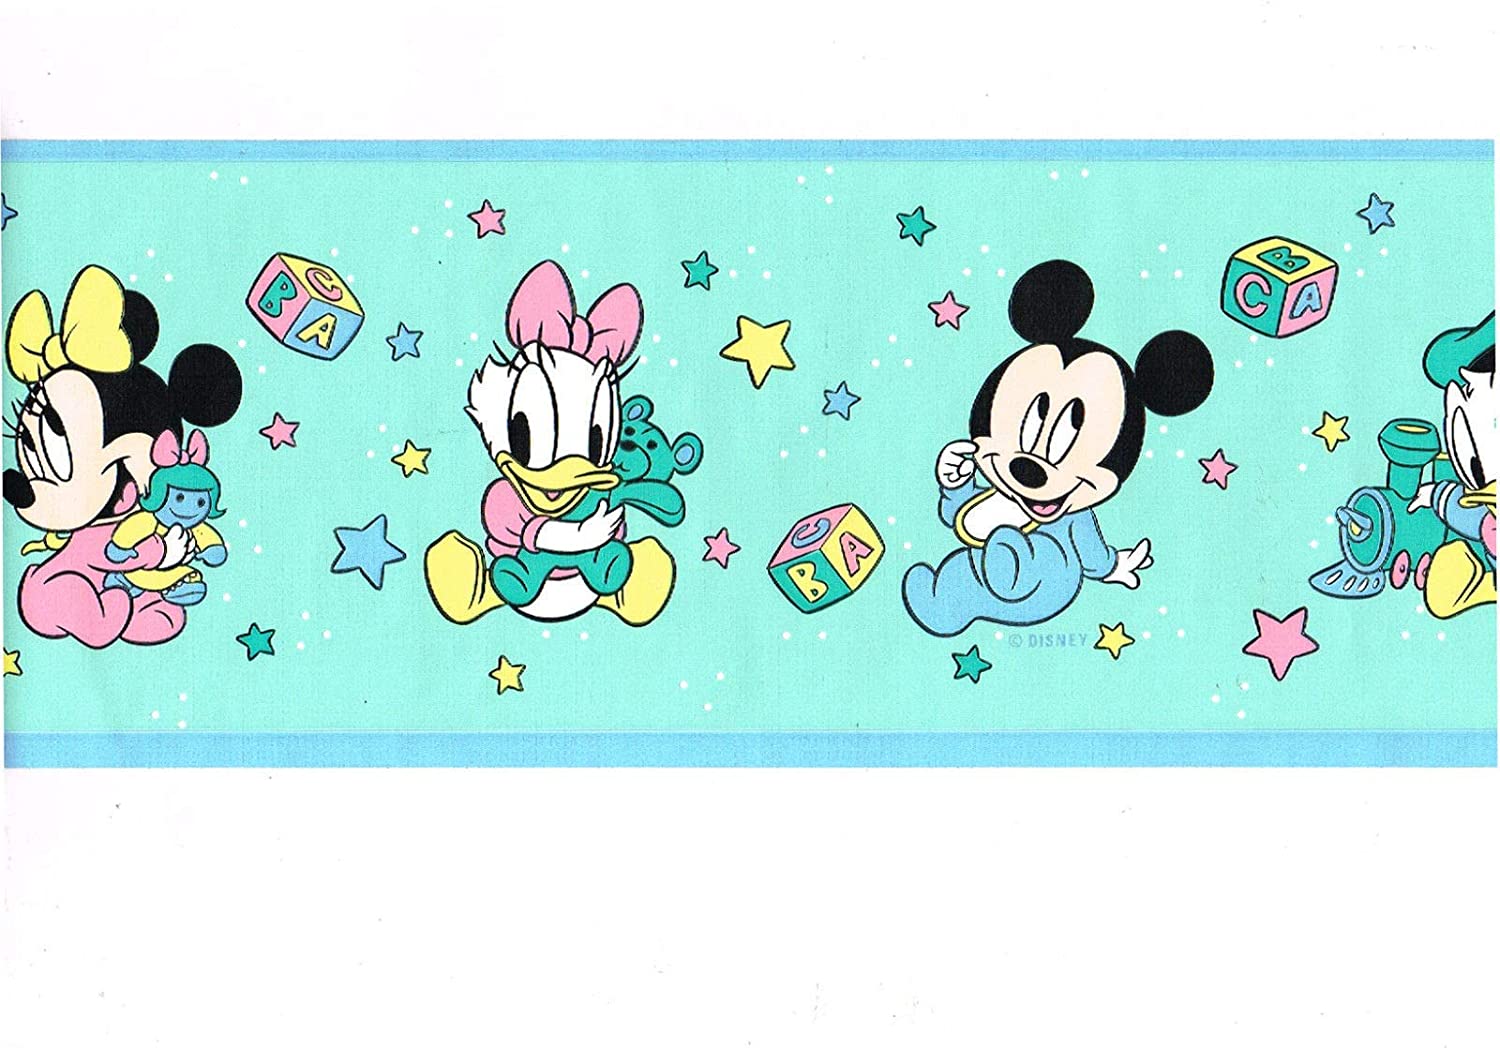 Disney Babies Wallpaper Border 8.5 Sq Feet Minnie Mouse, Mickey Mouse and Other Disney Characters: Kitchen & Dining